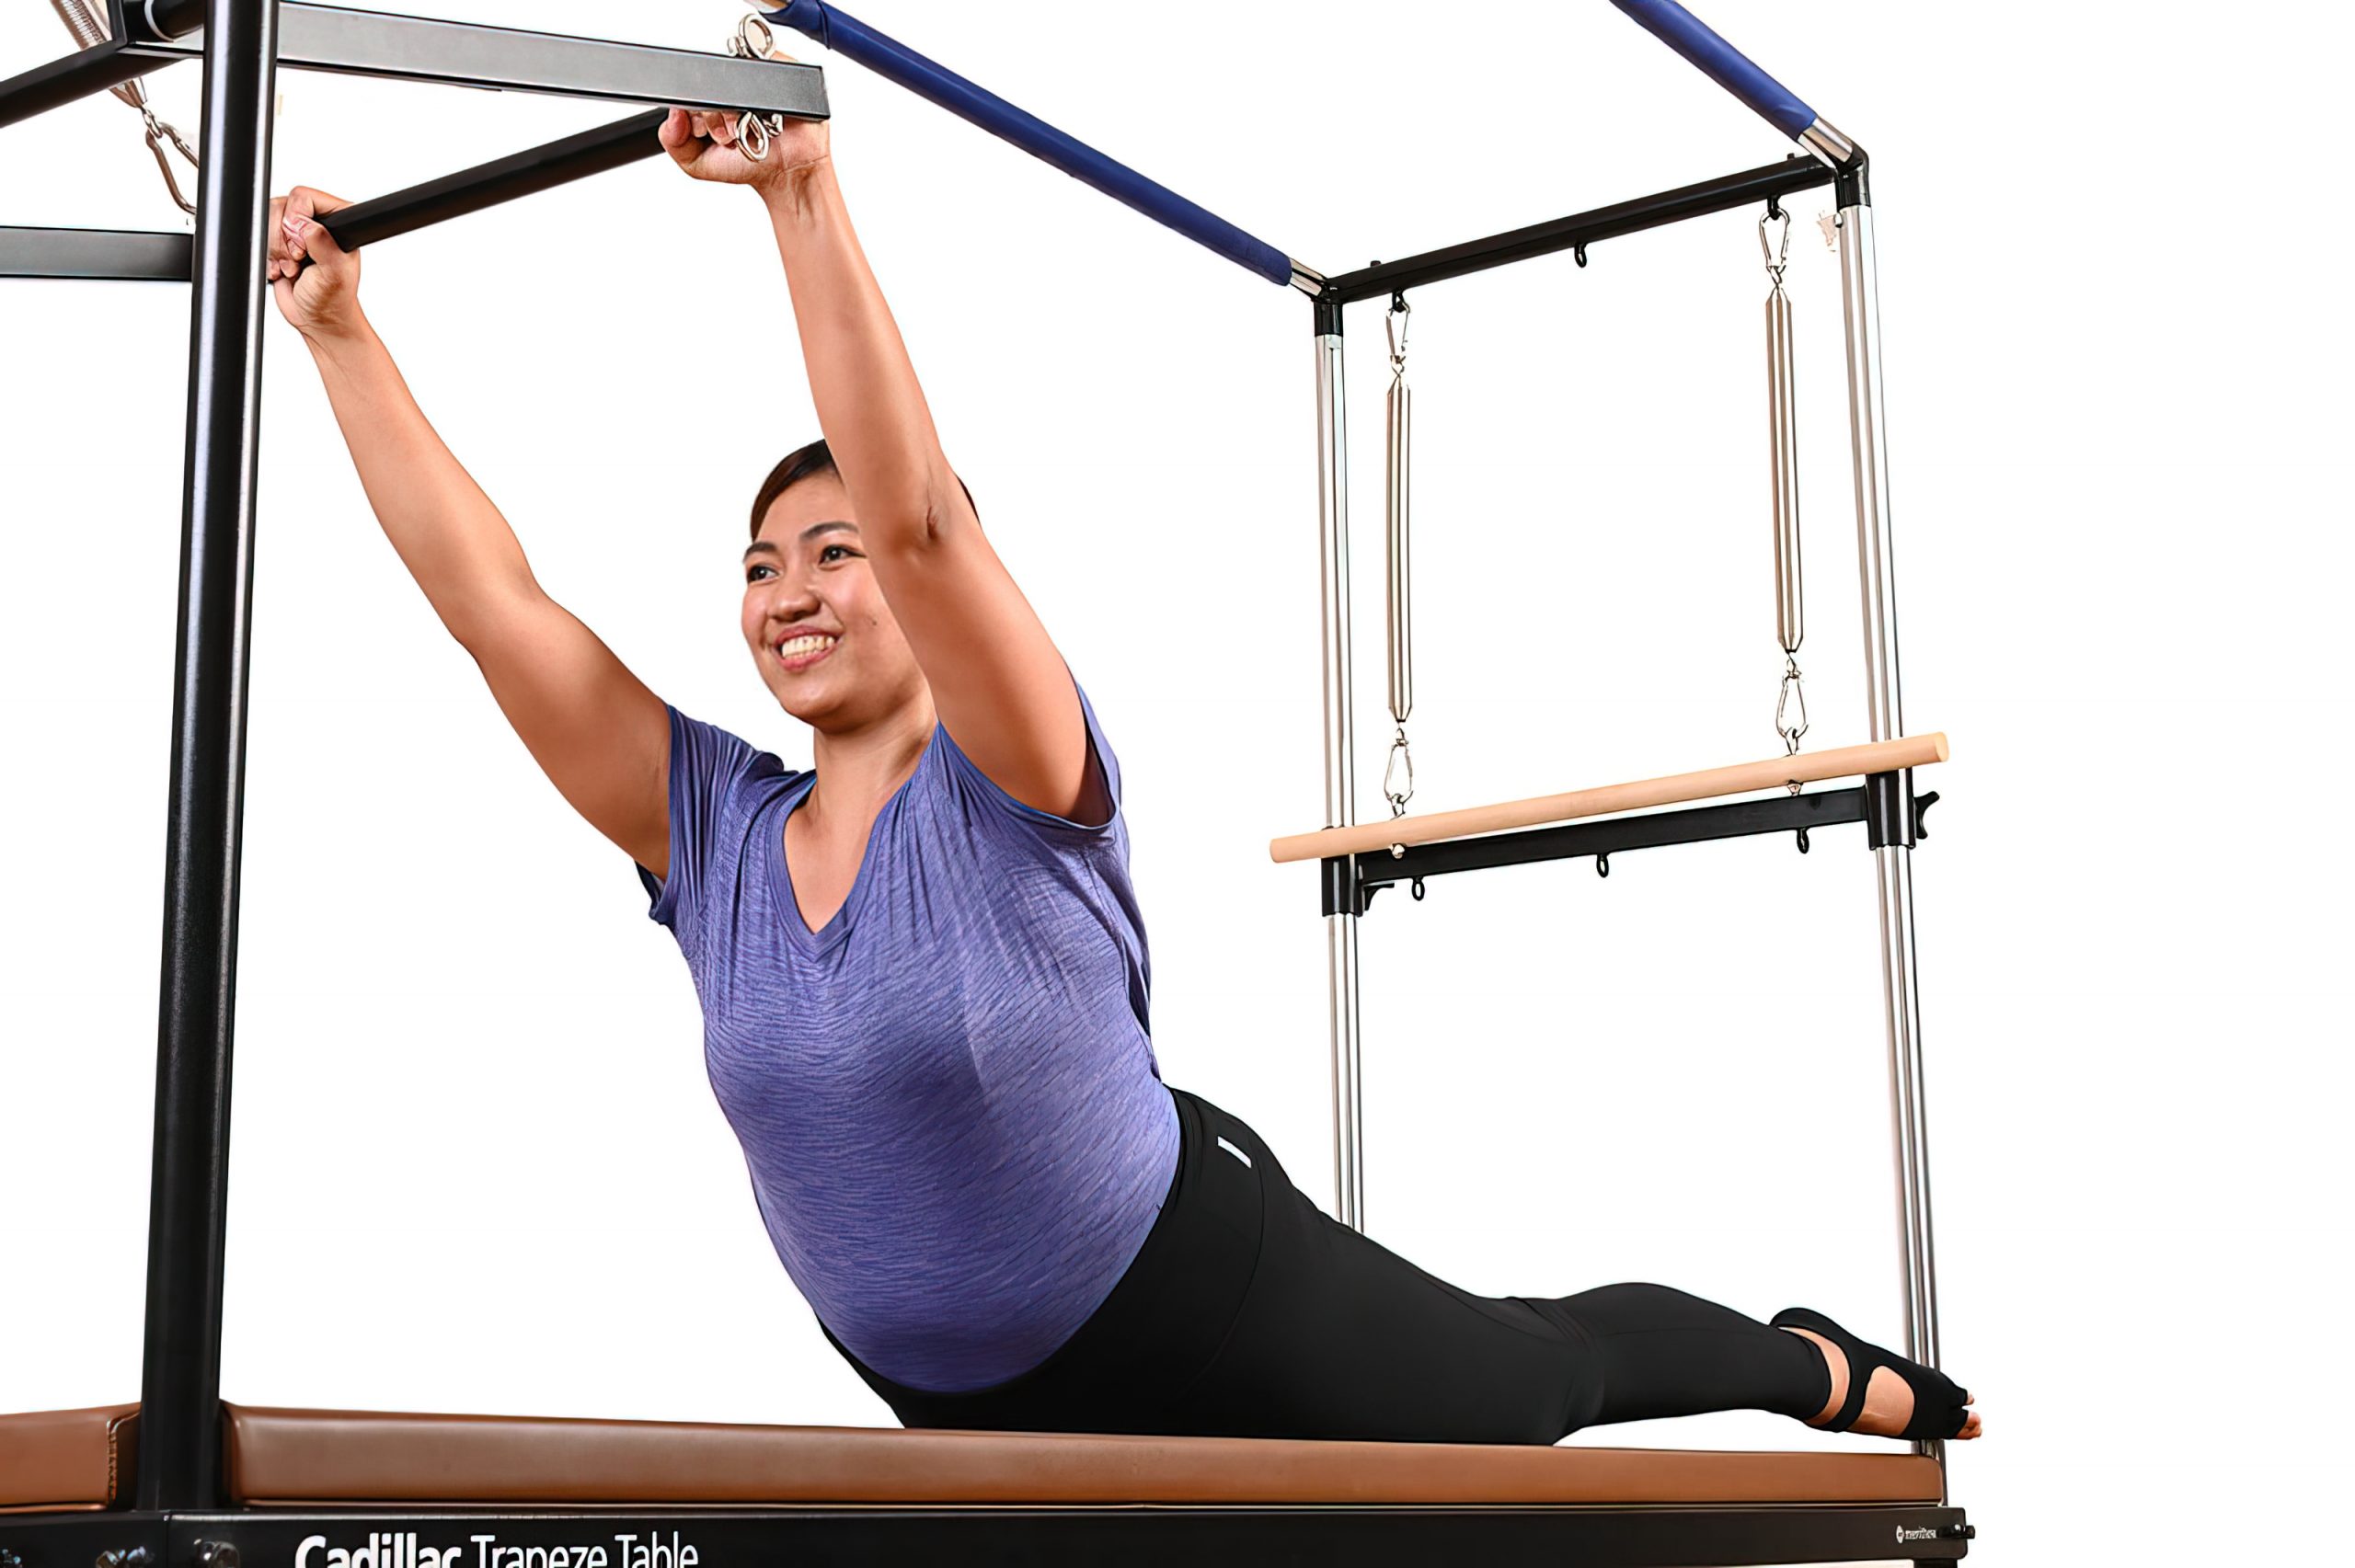 A skilled All Core Pilates instructor is seen demonstrating an exercise on a Pilates reformer machine.